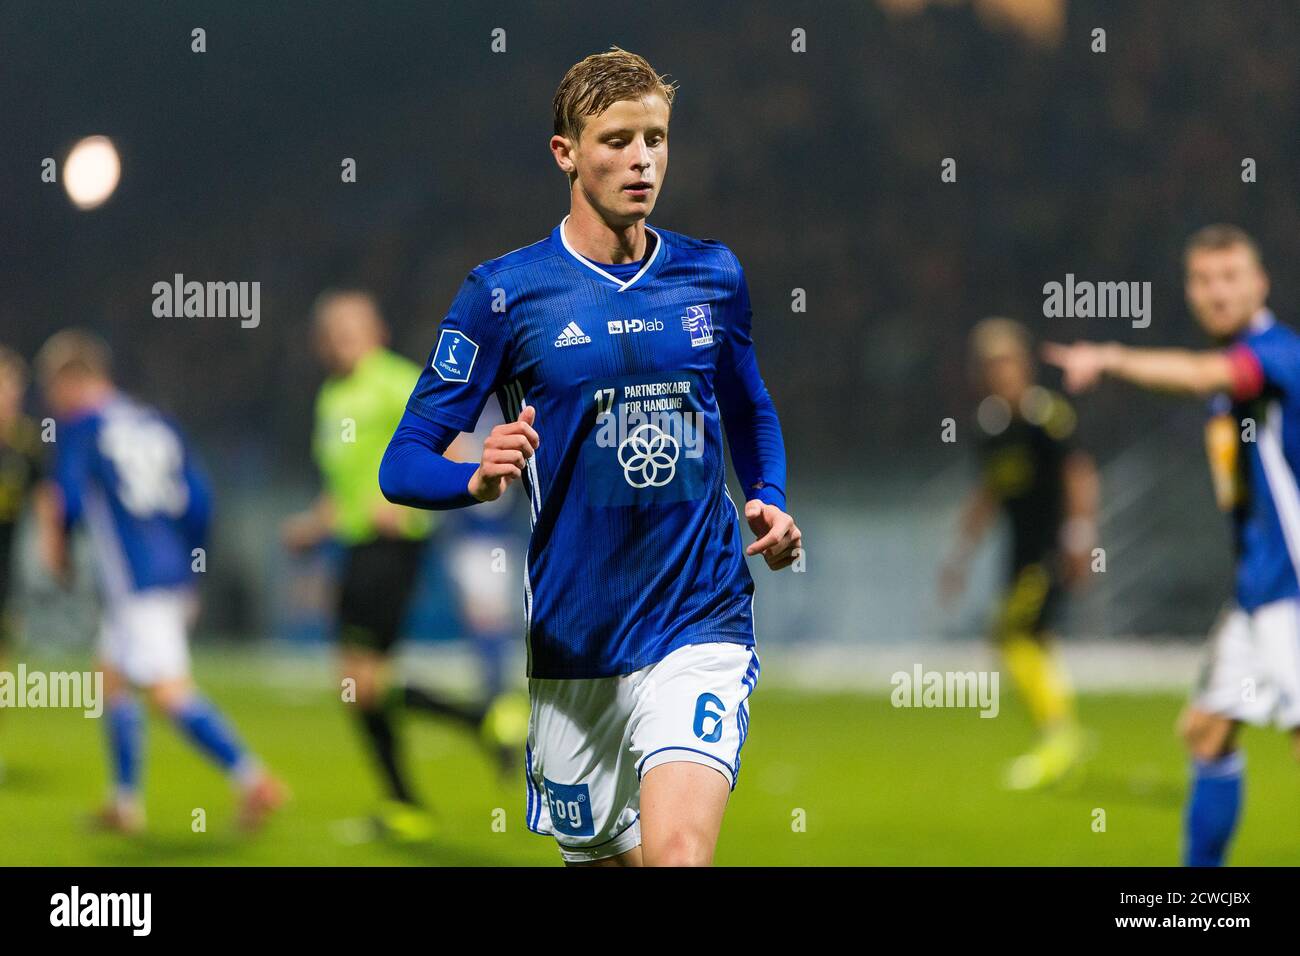 Lyngby, Denmark. 20th, October 2019. Frederik Winther (6) of Lyngby seen during the 3F Superliga match between Lyngby Boldklub and Broendby IF at Lyngby Stadium. (Photo credit: Gonzales Photo - Thomas Rasmussen). Stock Photo